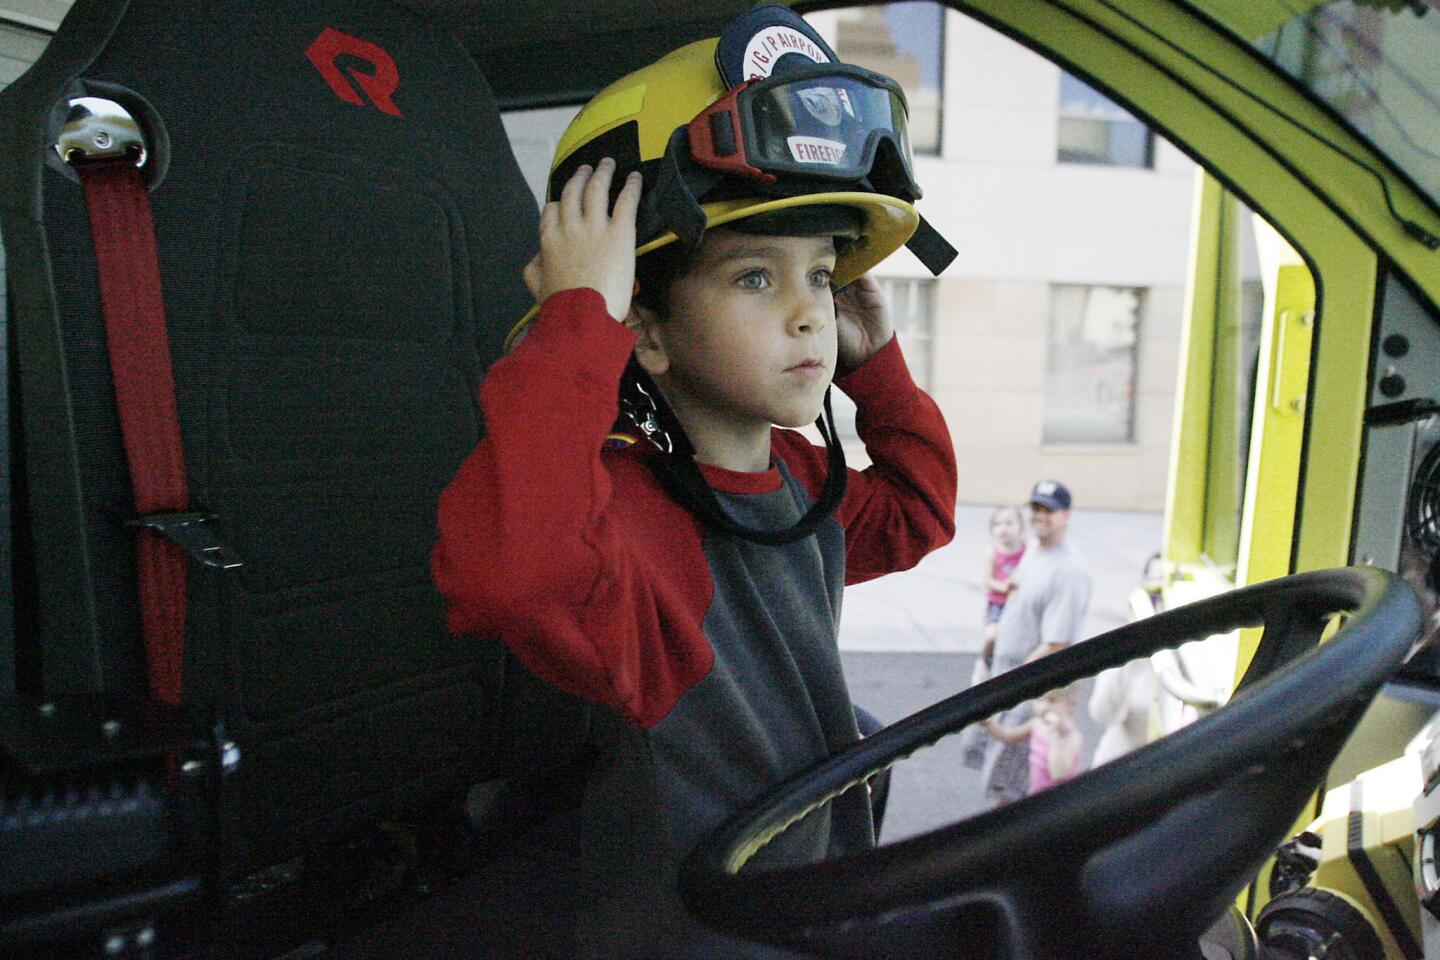 Henry Hadinger, 6, rides in the Rosenbauer Panther during Fire Service Day in Burbank on Saturday, May 12, 2012.